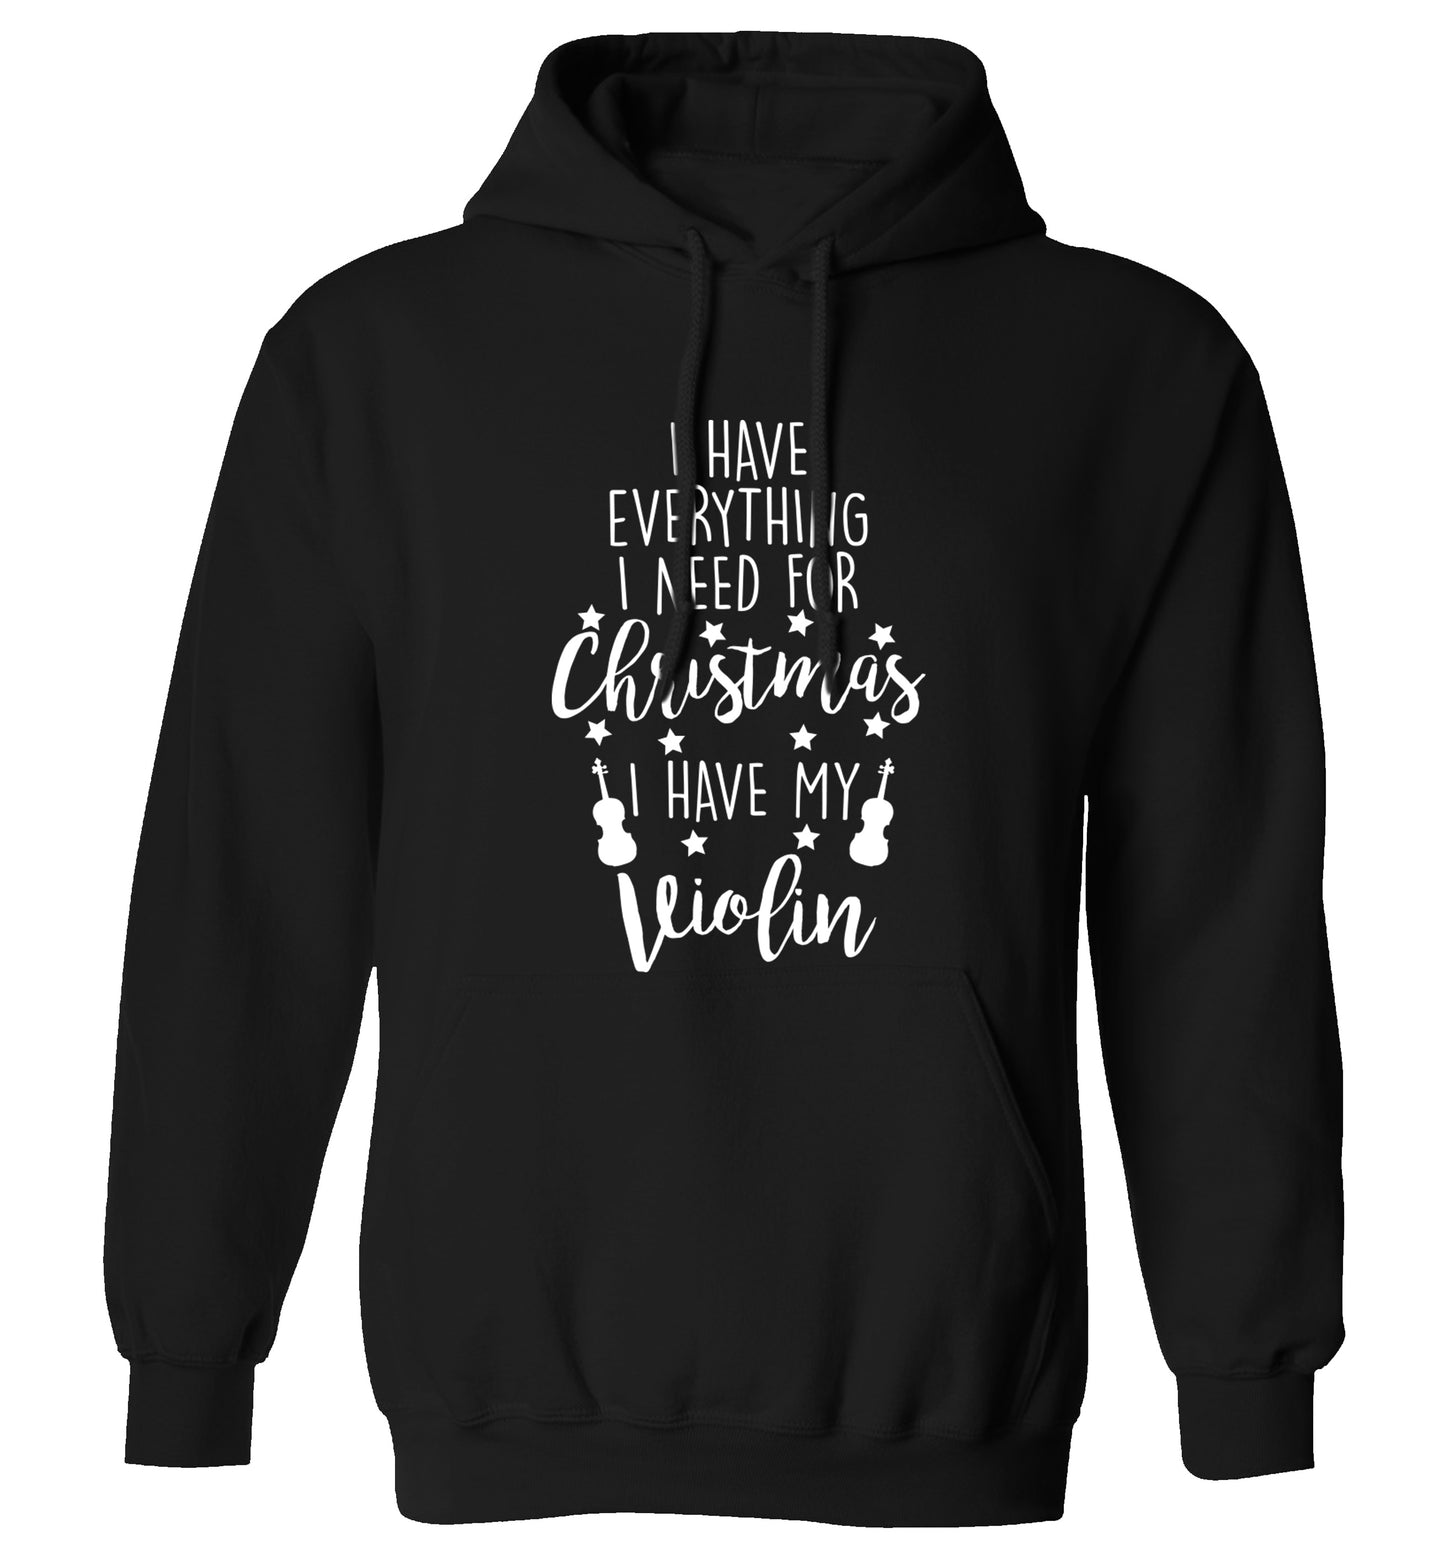 I have everything I need for Christmas I have my violin adults unisex black hoodie 2XL